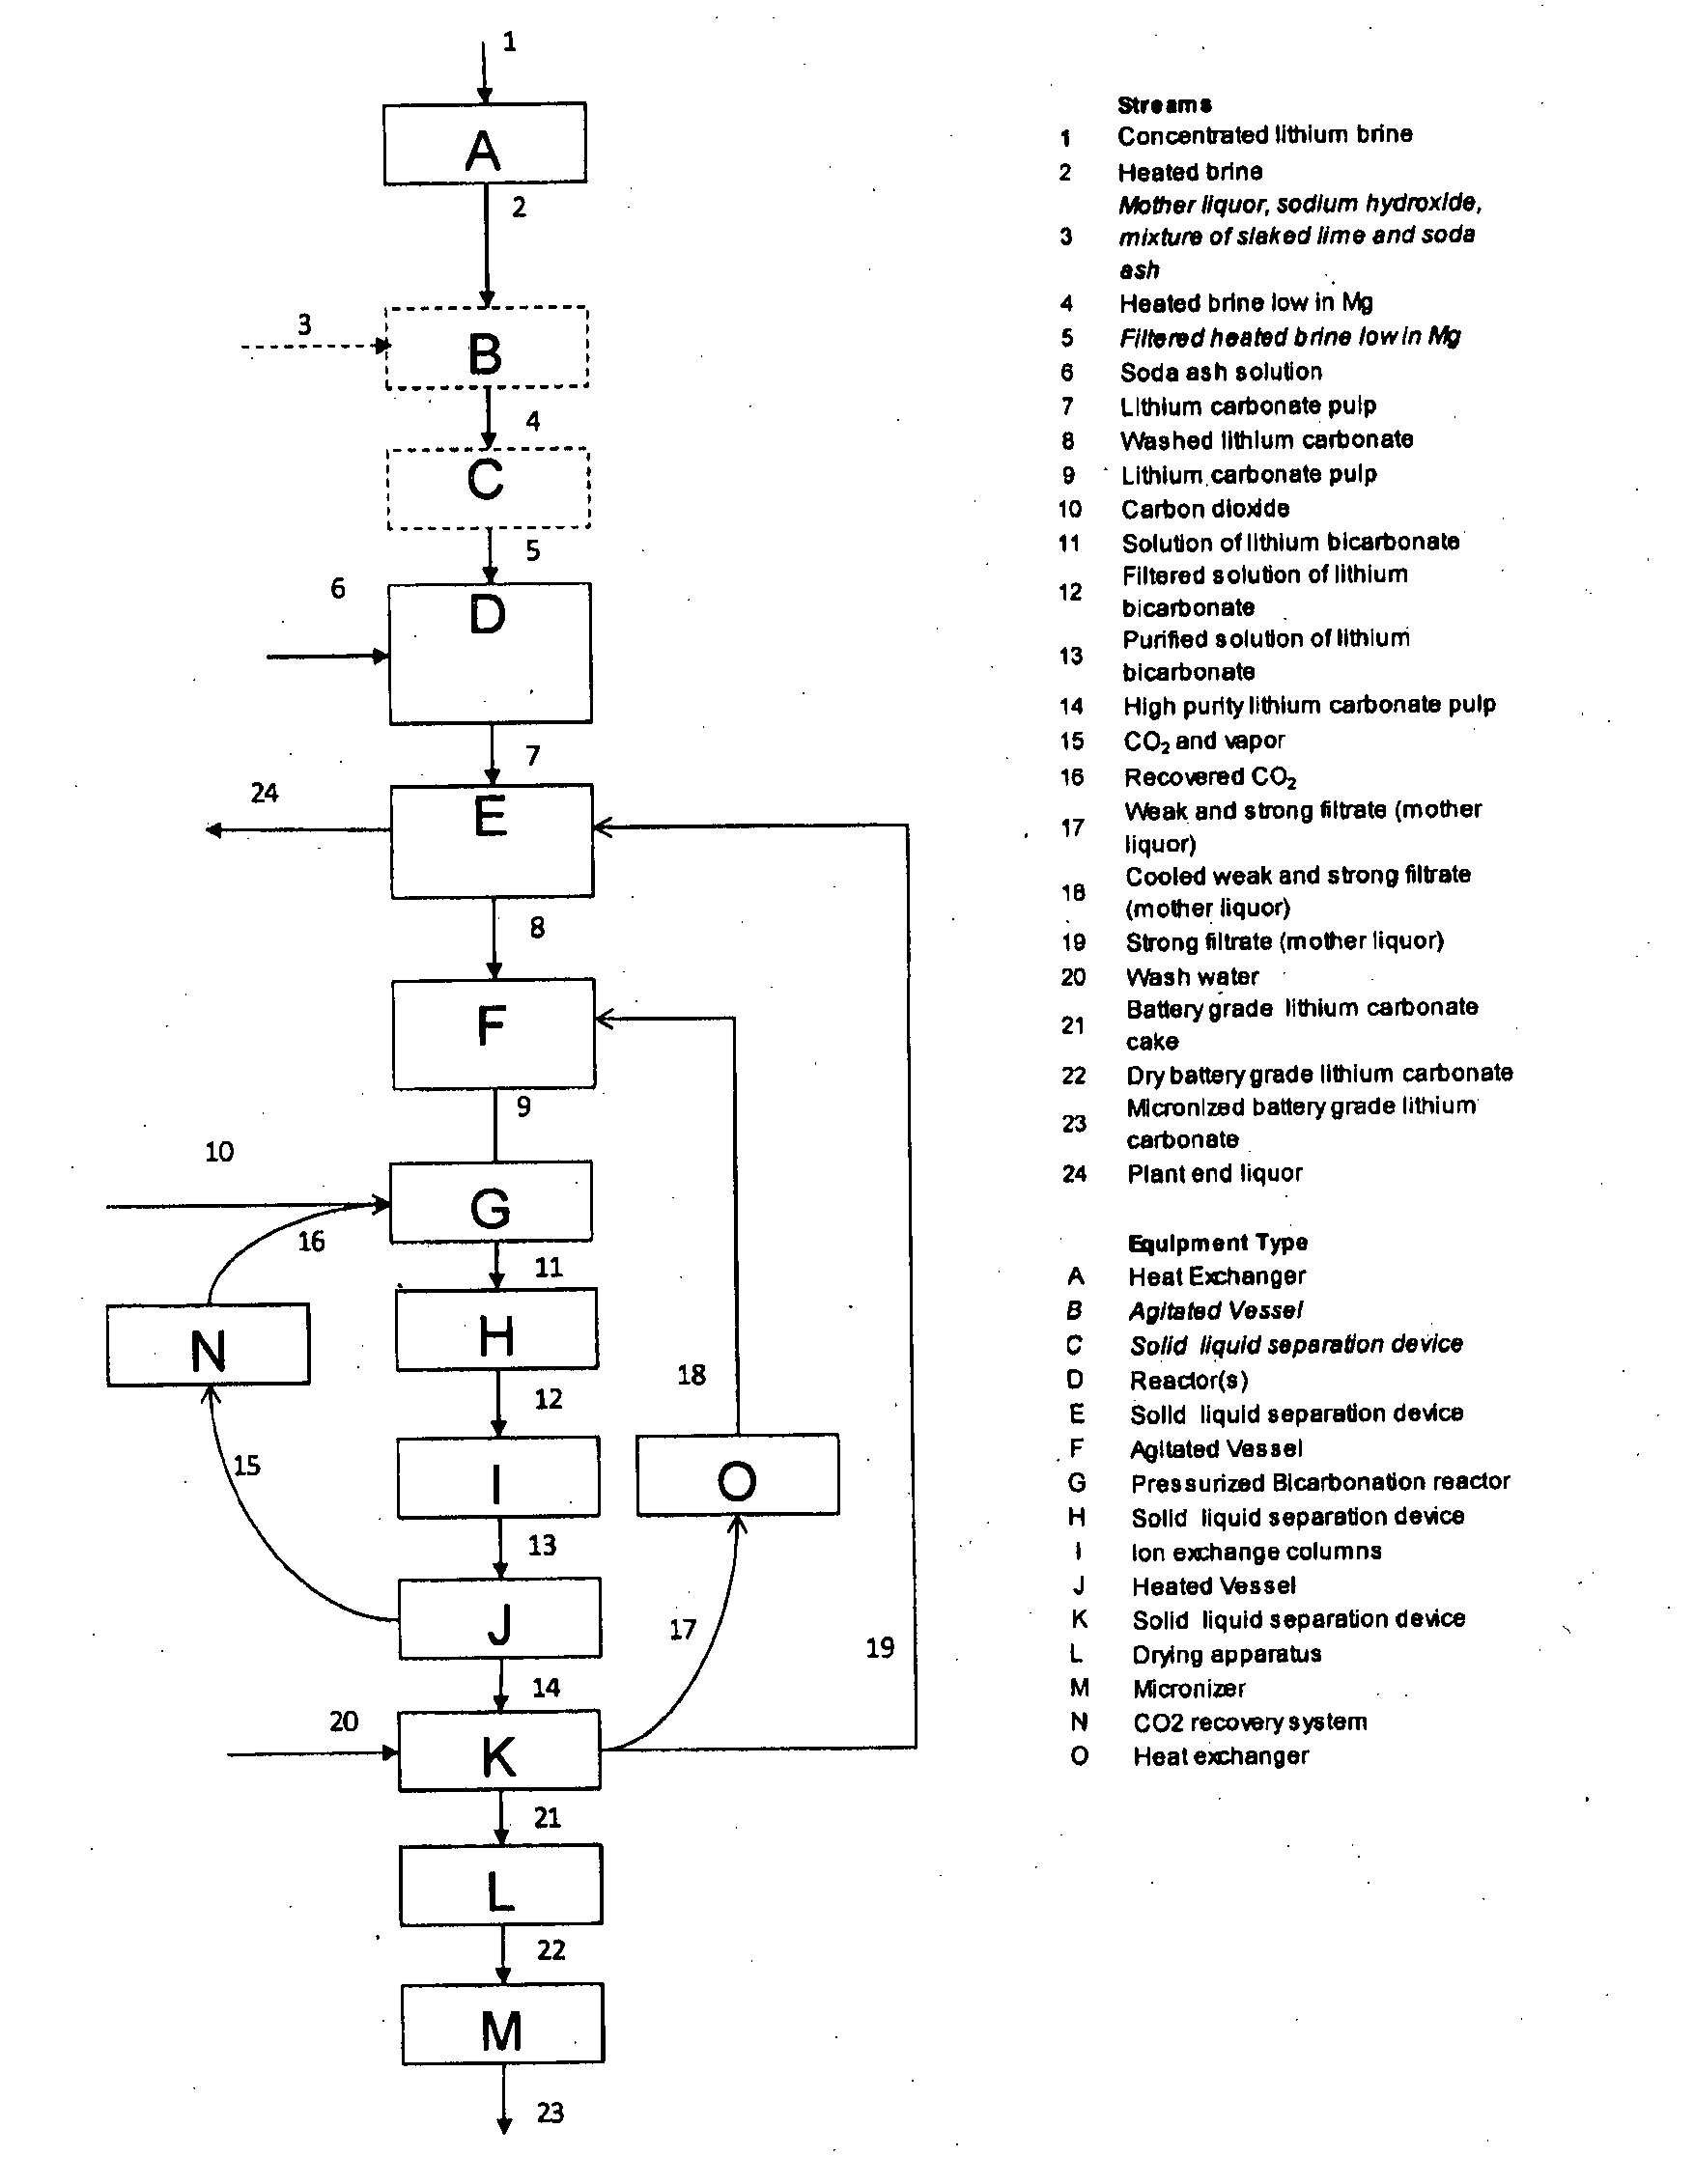 Process for producing lithium carbonate from concentrated lithium brine